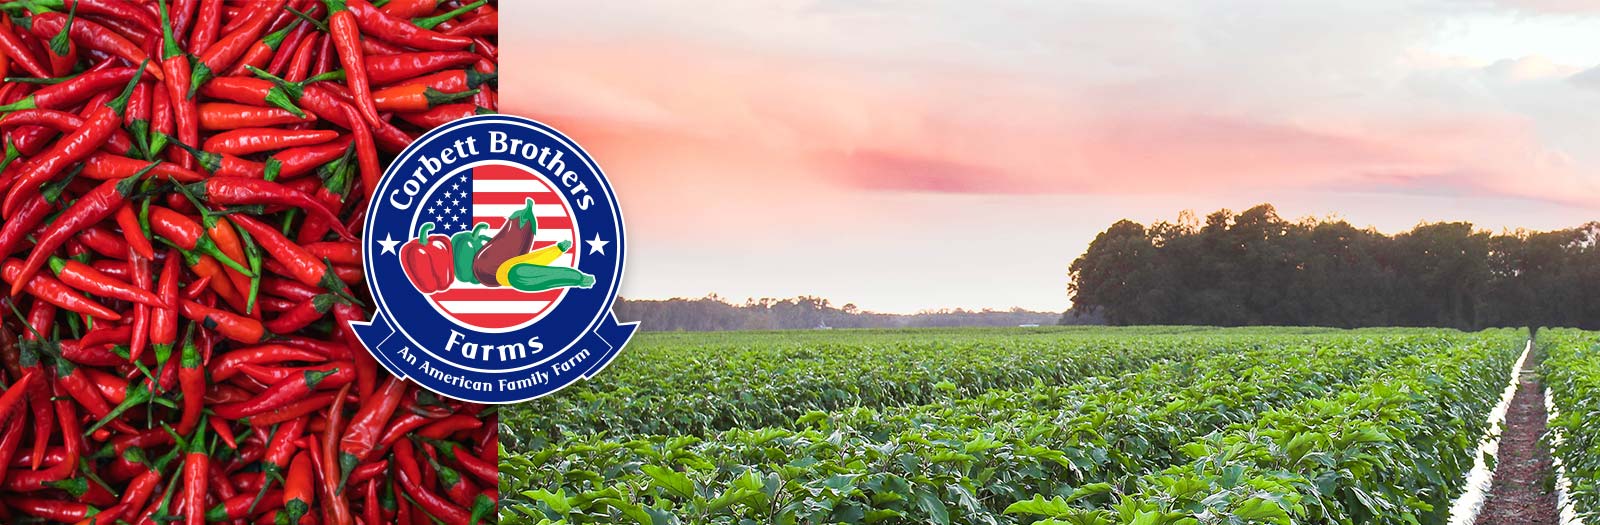 Corbett Brothers Farms - Vegetables Page Header